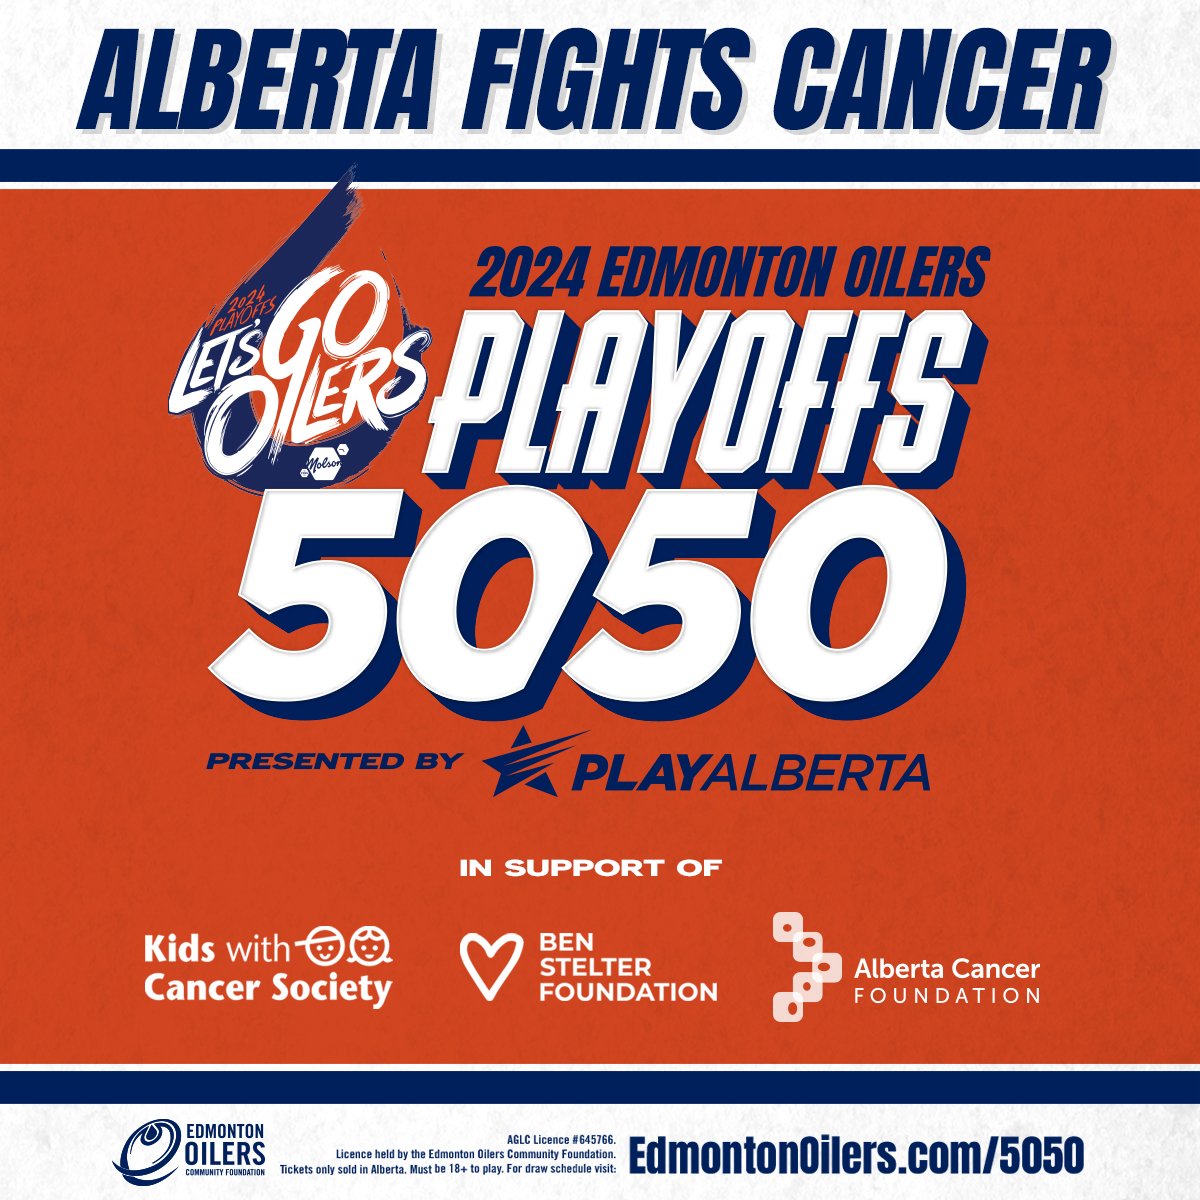 What a night for the start of the Alberta Fights Cancer 50/50 presented by @PlayAlbertaCA! 💪 Two more lucky ticket holders (B-100678813 & A-100691036) are headed to an #Oilers playoff game & the lucky fan with C-100391125 has won $10,000 cash! 🎟 EdmontonOilers.com/5050tw